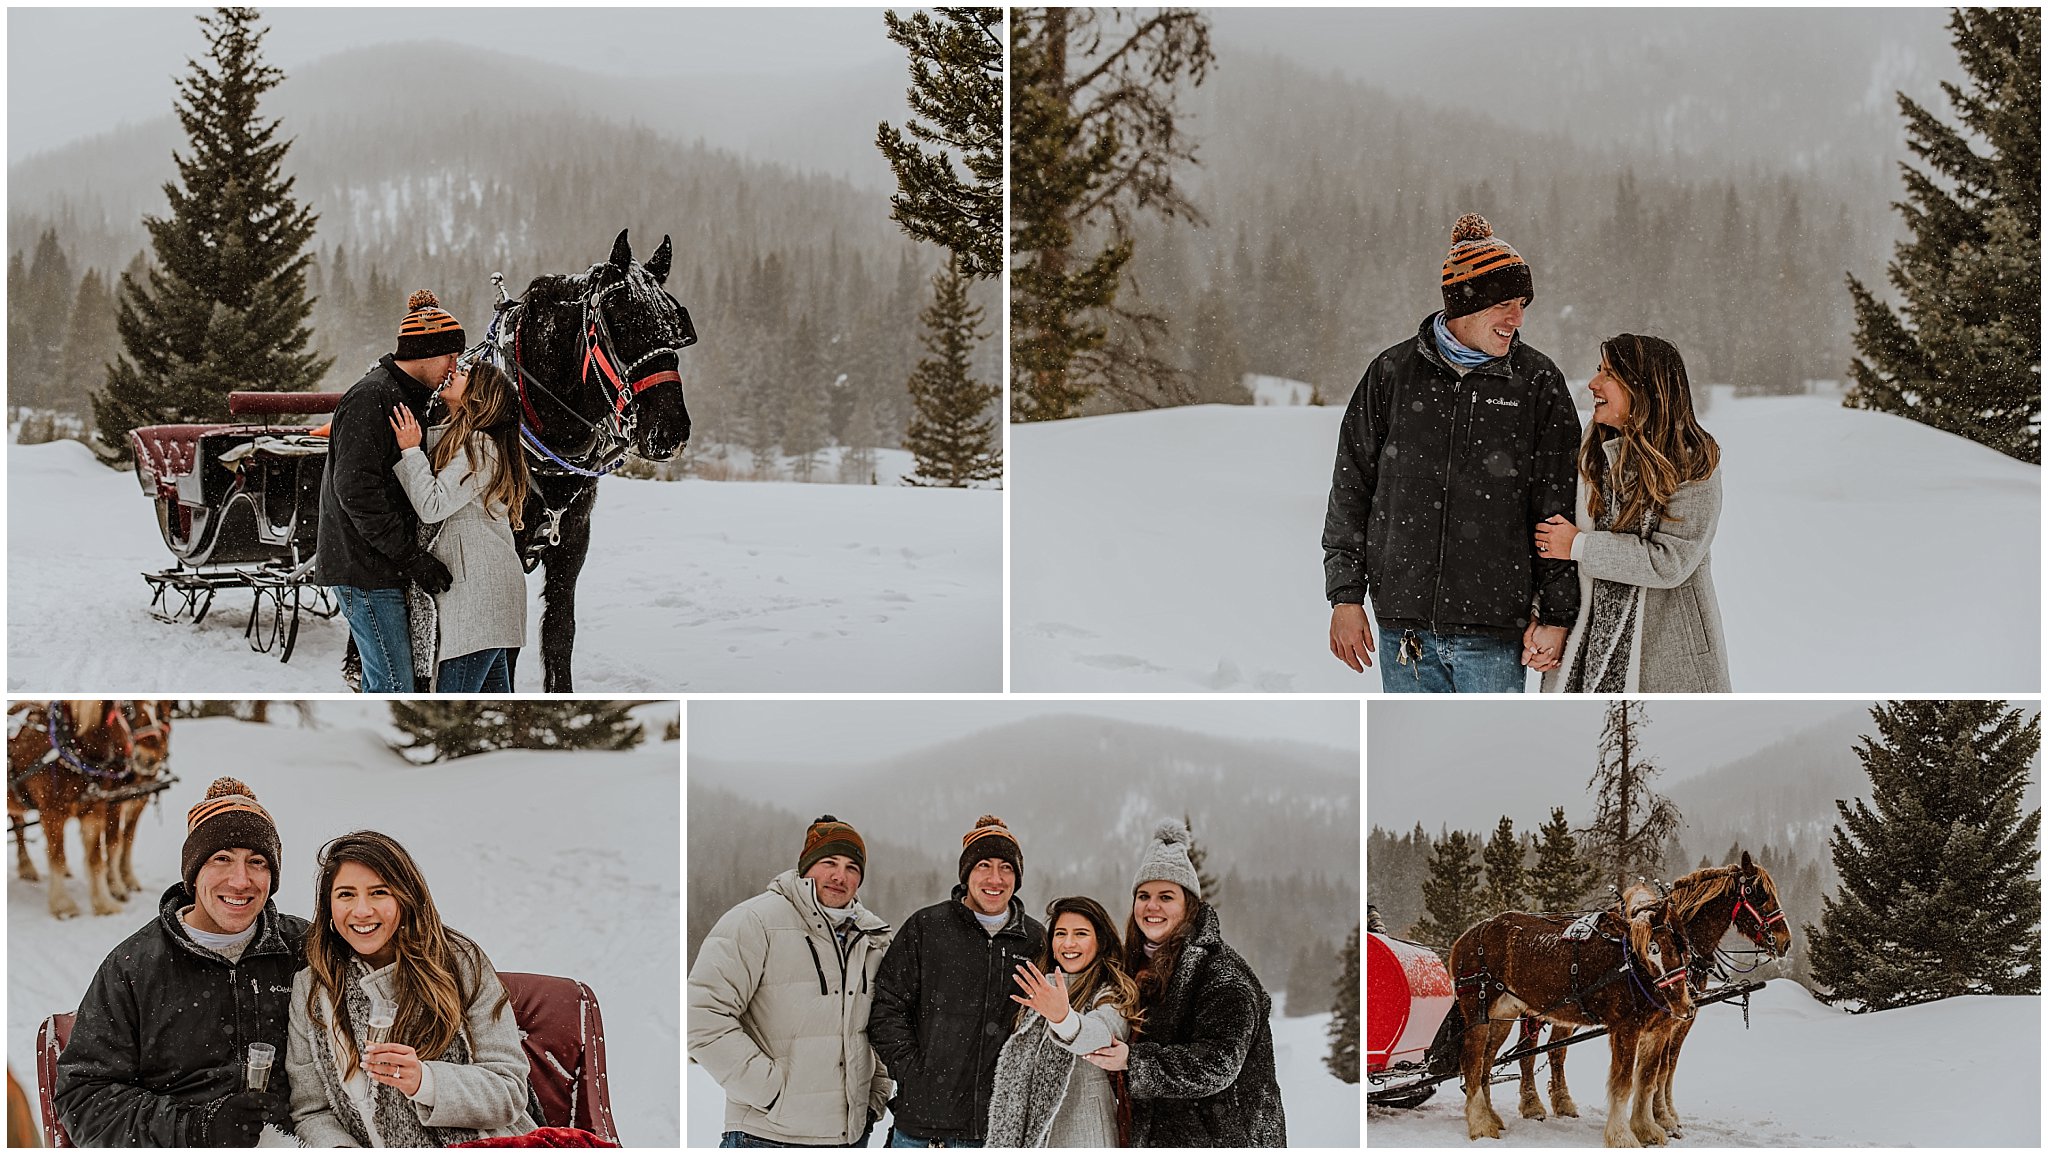 Newly engaged couple embraces in Breckenridge for portraits in the snow